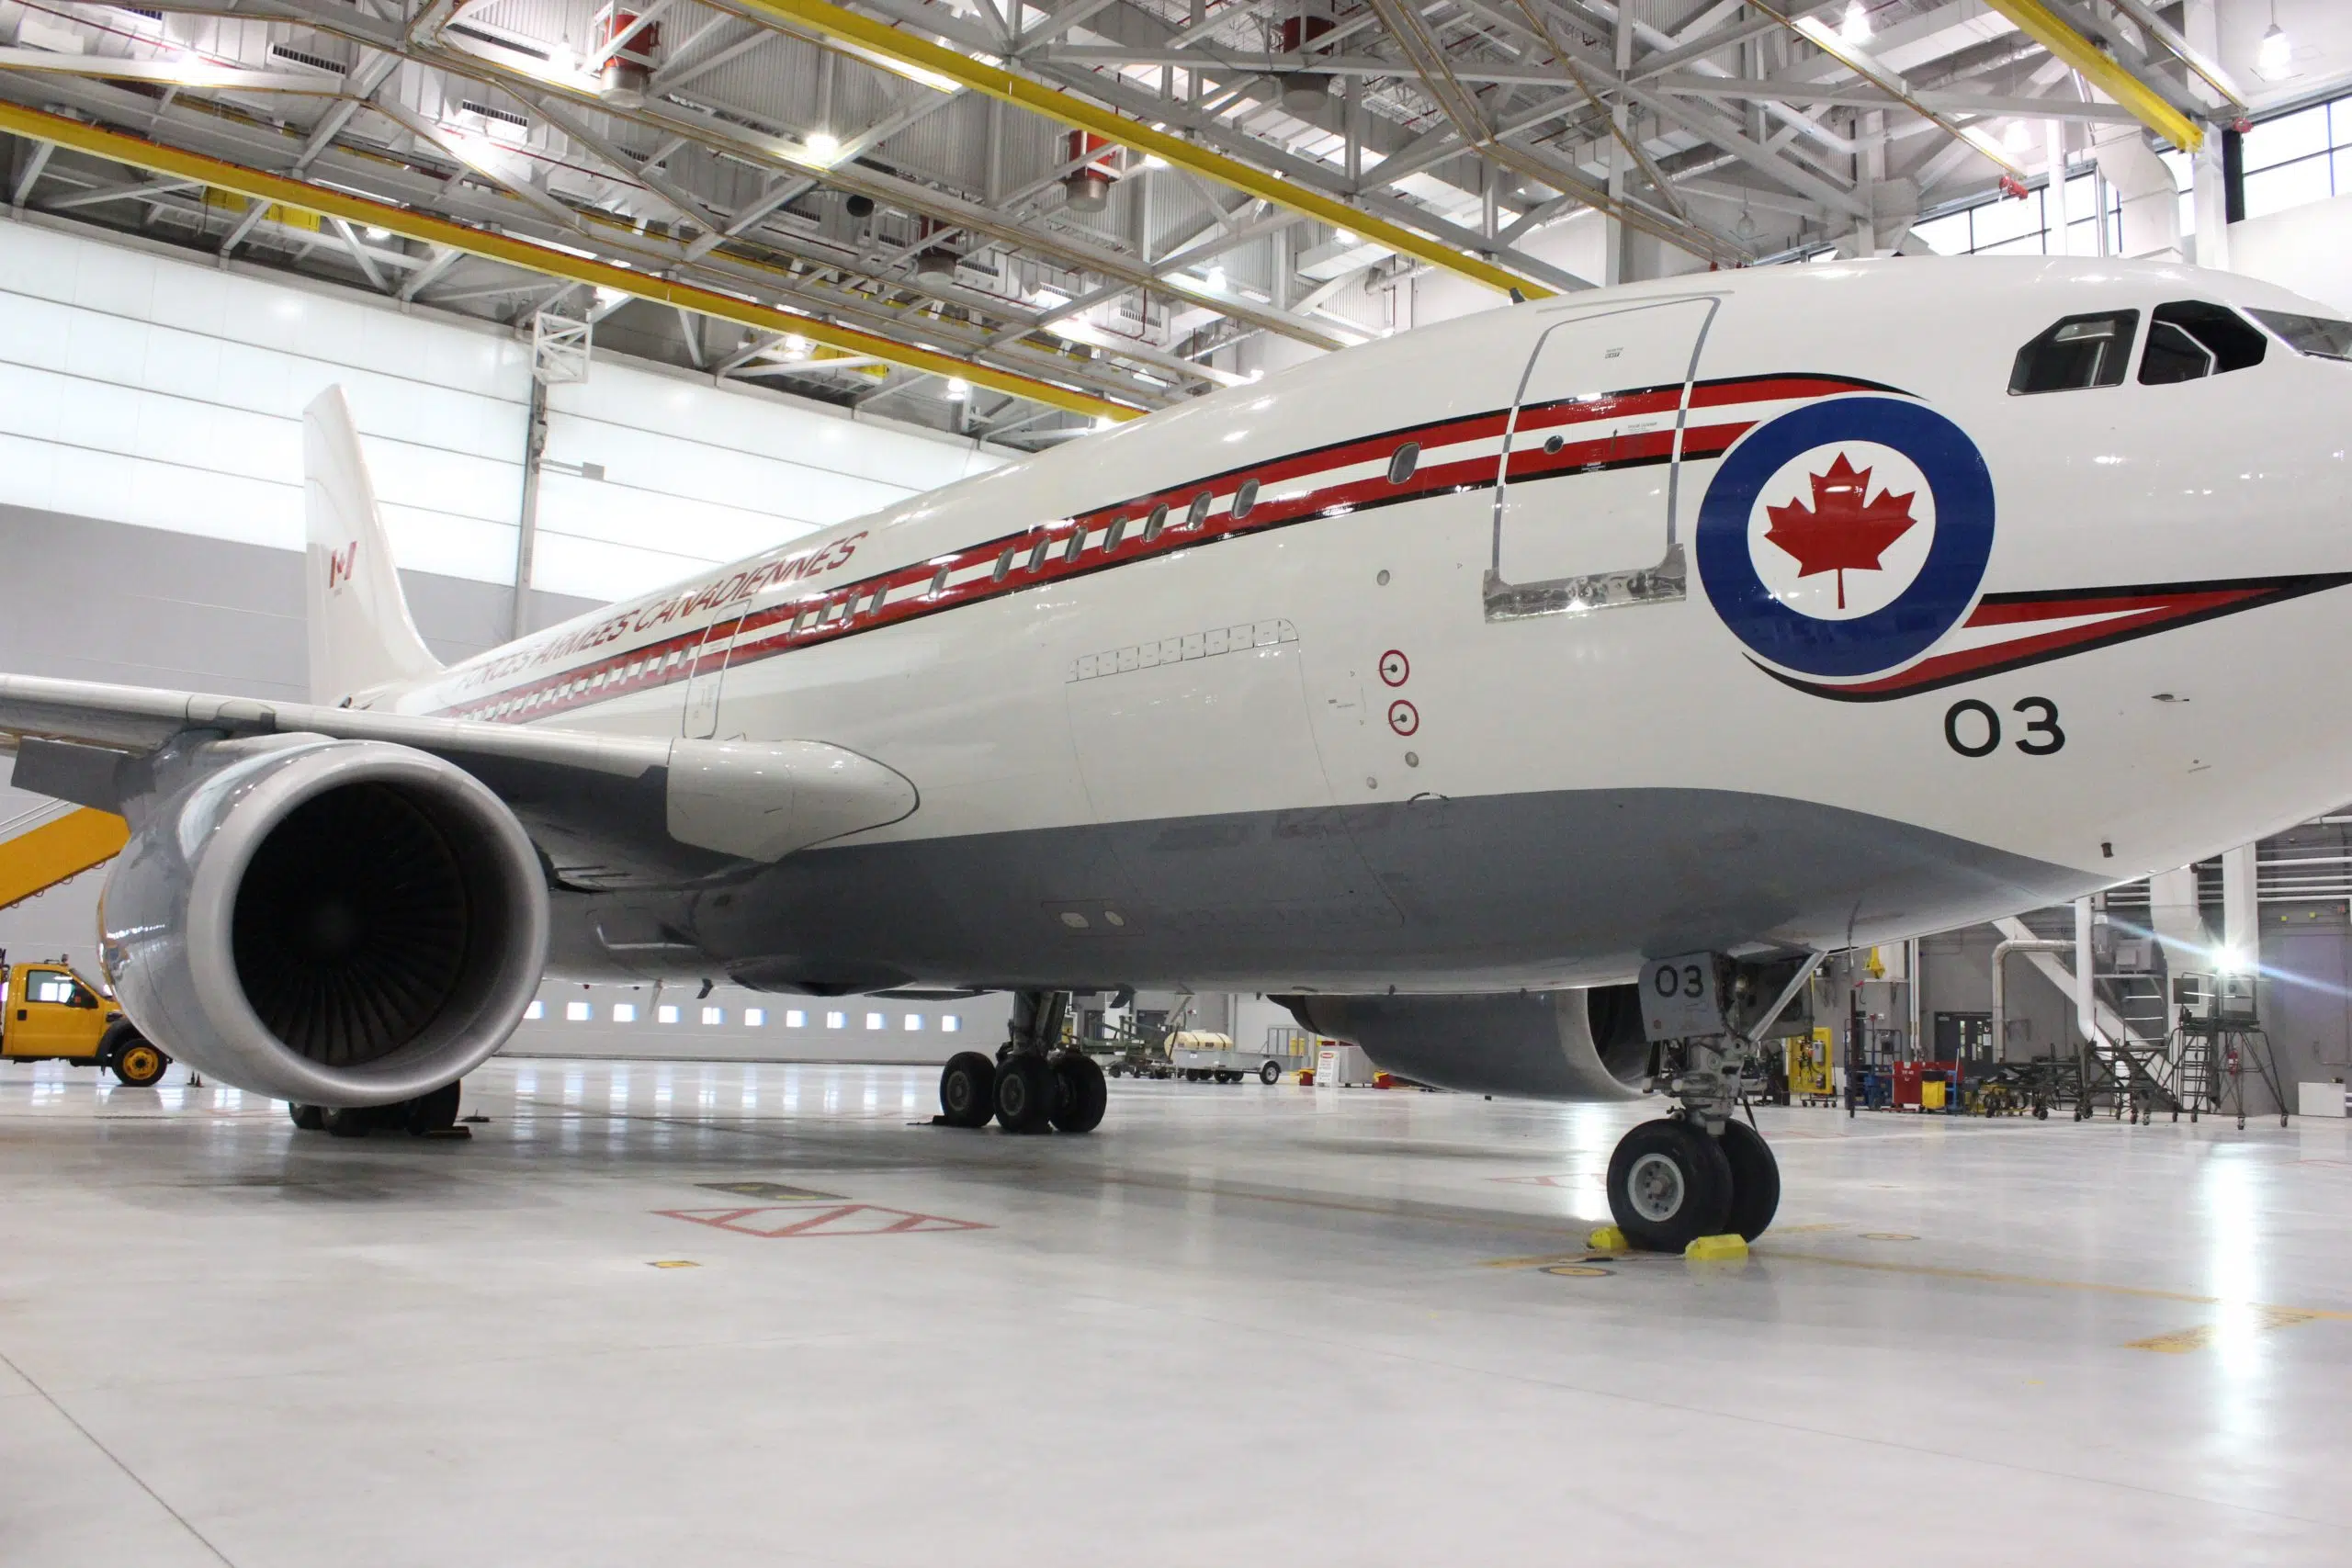 Contract extended for work at CFB Trenton